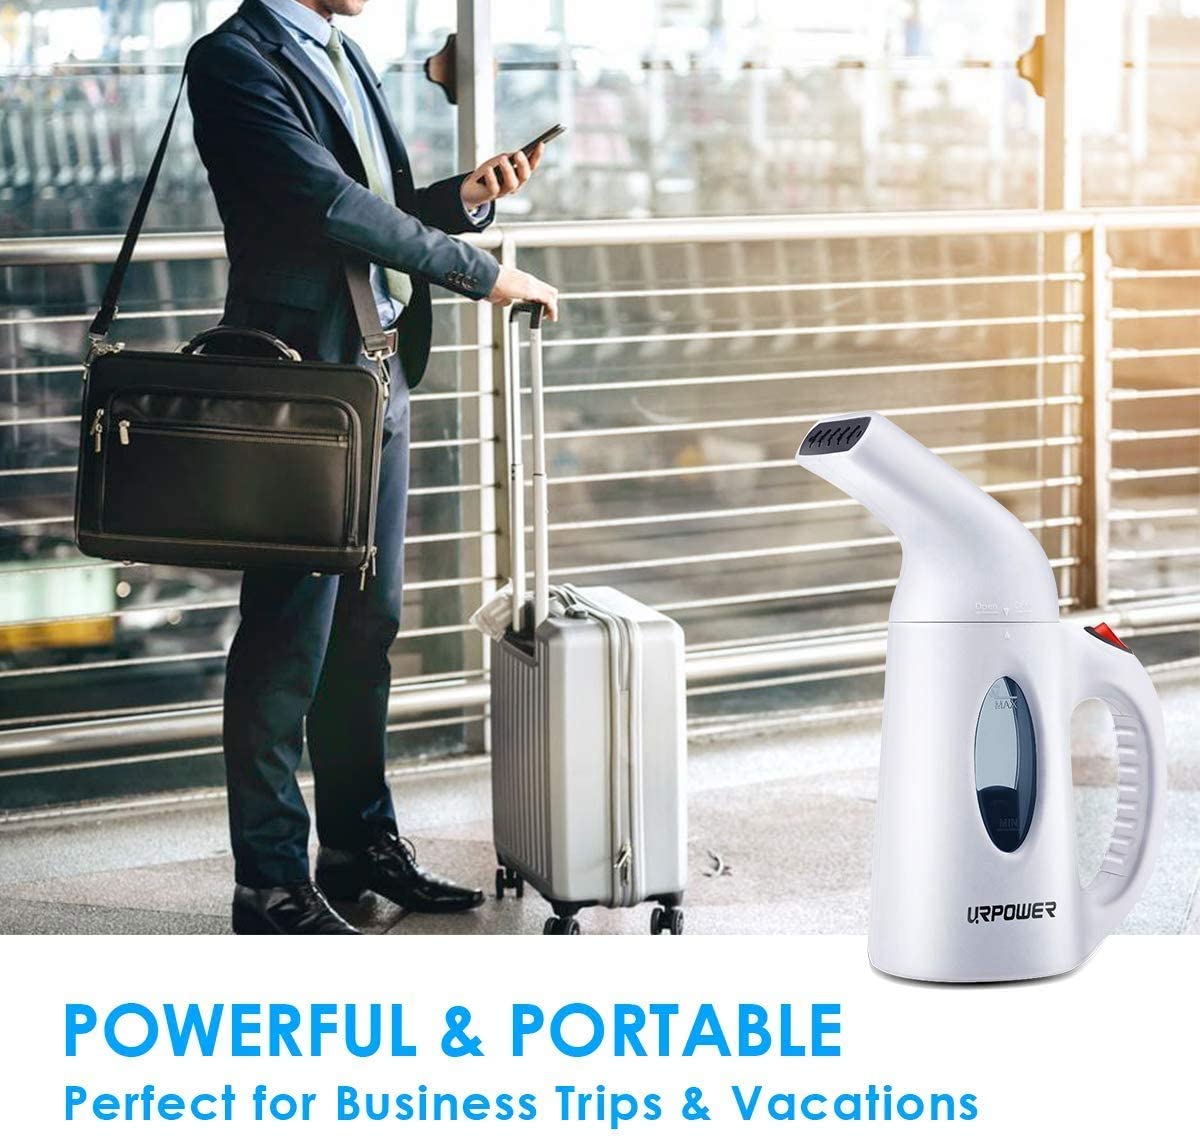 URPOWER Garment Steamer 130ml Portable 7 in 1 Handheld Fabric Steamer Fast Heat-up Powerful Garment Clothes Steamer with High Capacity for Home and Travel, Travel Pouch Included- Not for Abroad